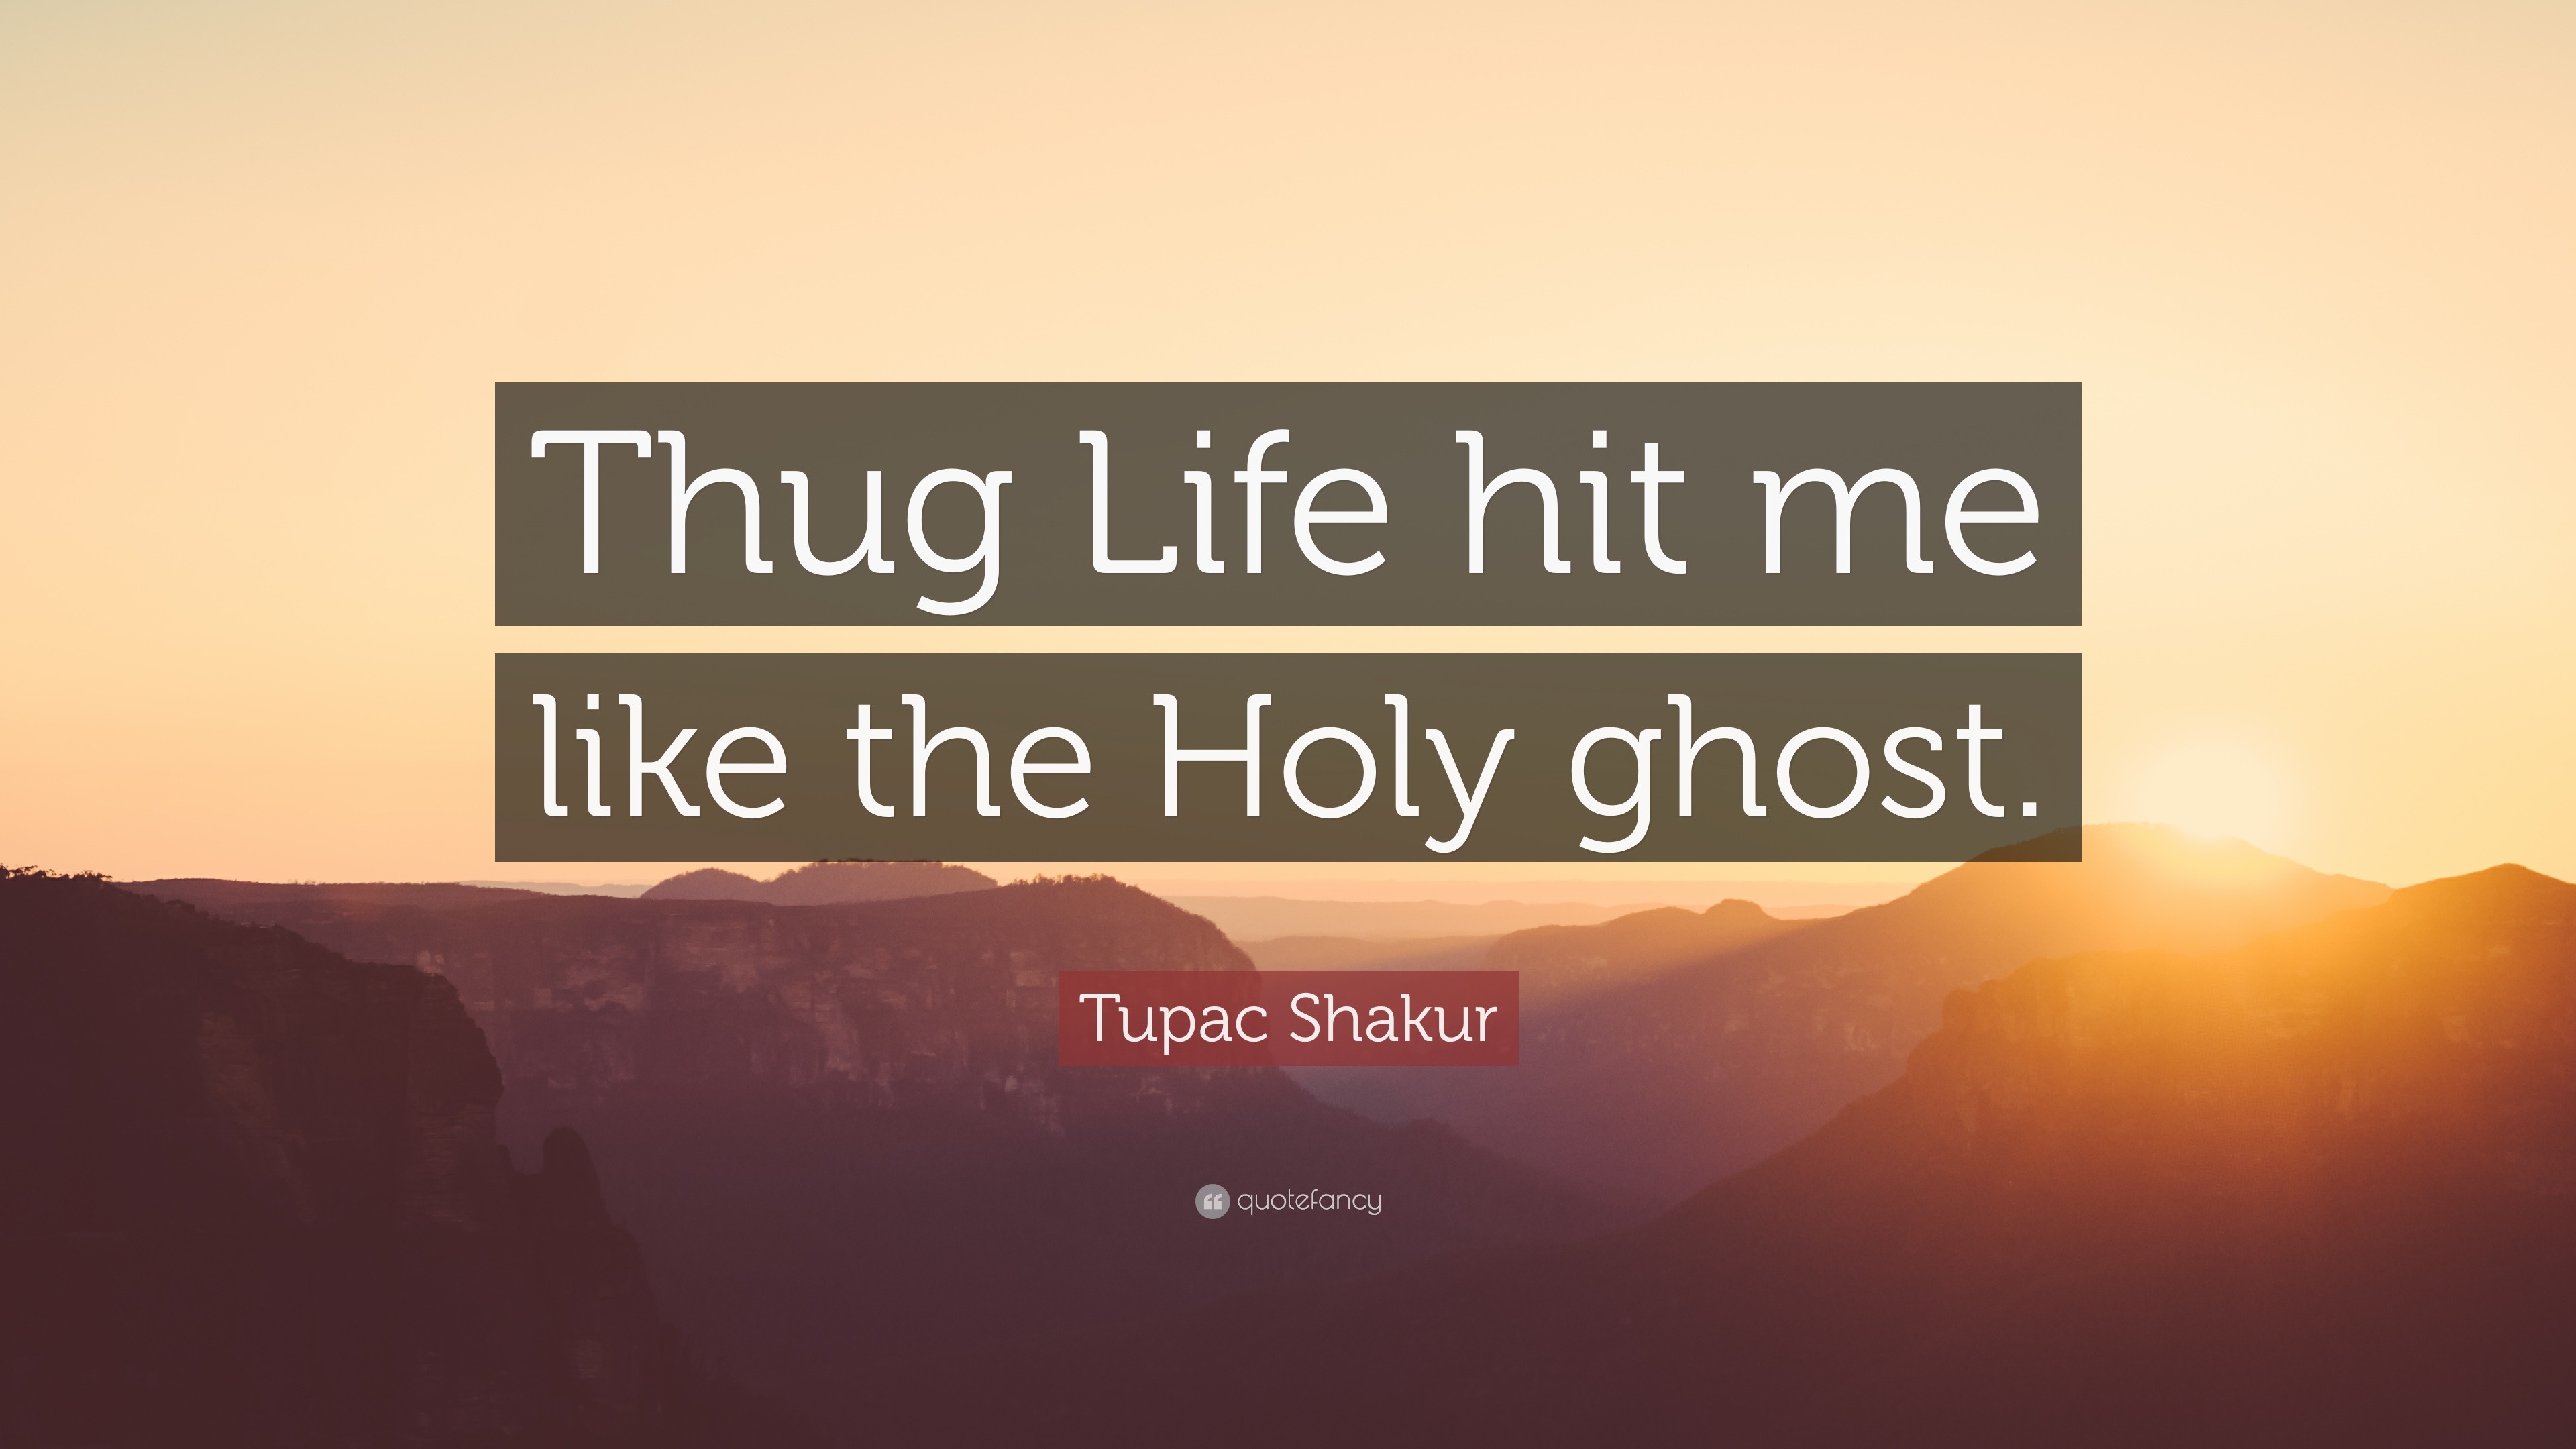 thug quotes about life